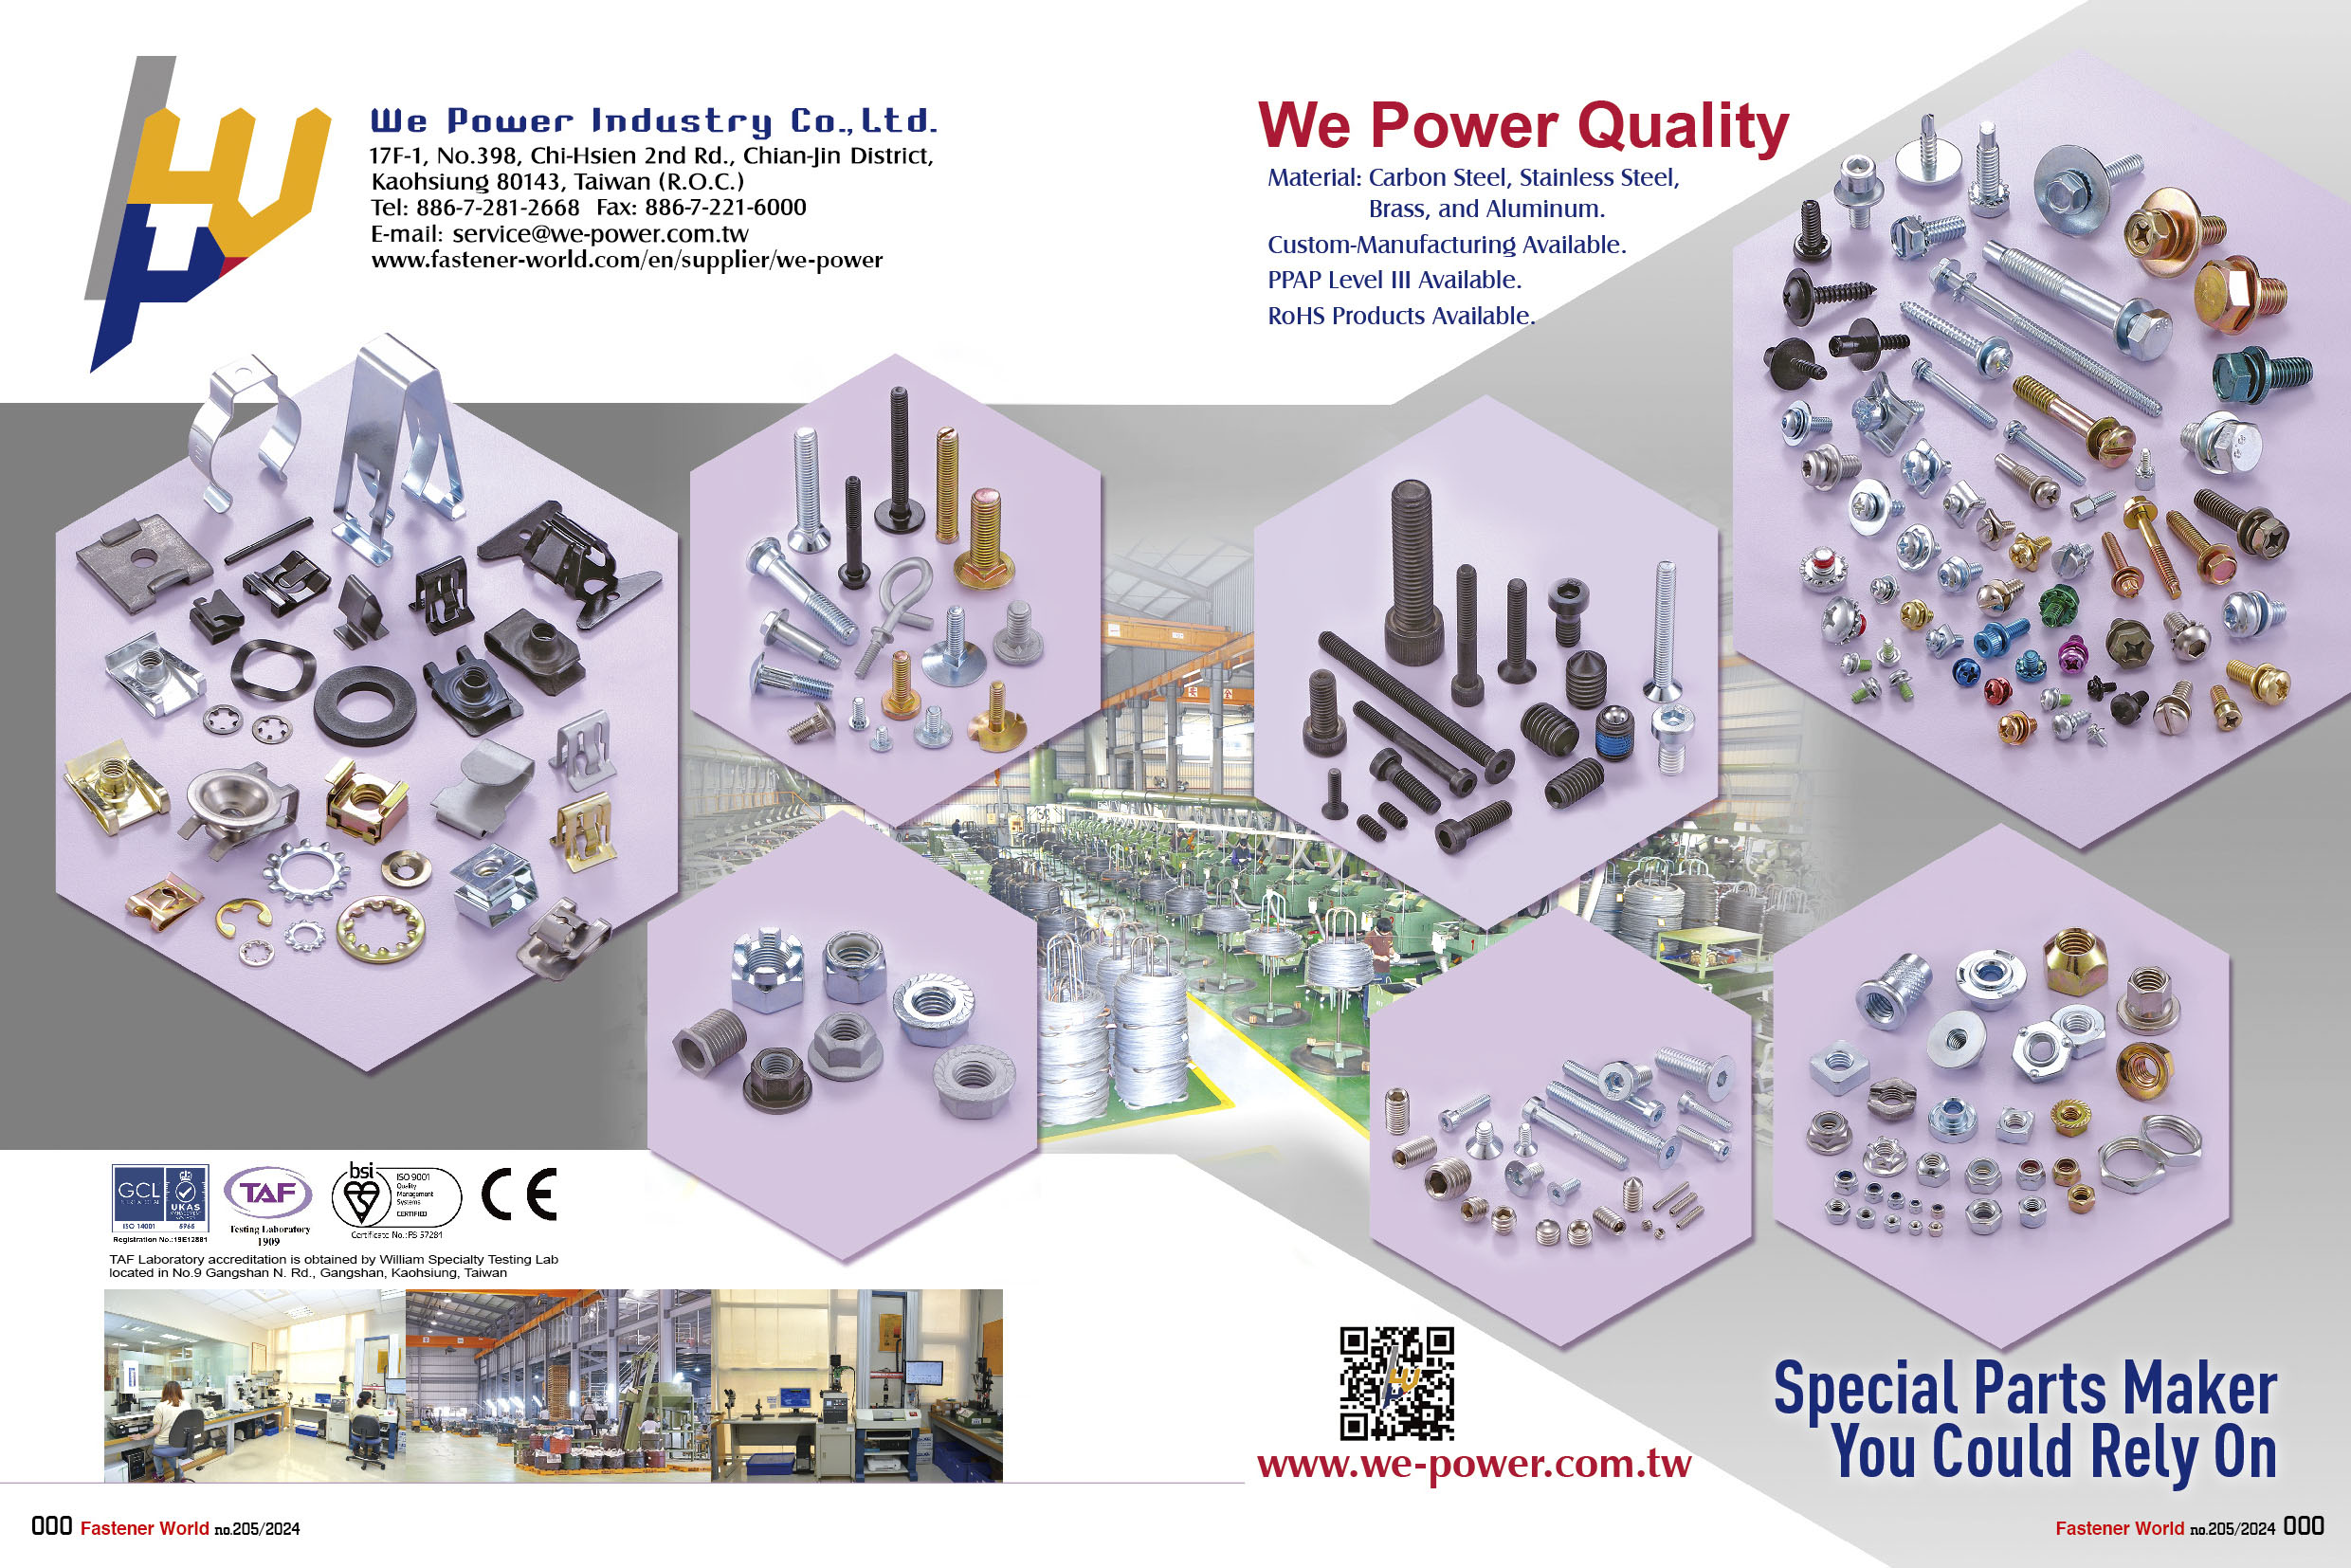 WE POWER INDUSTRY CO., LTD.  , SPECIAL PARTS, SHEET METAL SCREW, SELF TAPPING SCREW, SELF DRILLING SCREW, MACHINE SCREW, THREAD ROLLING SCREW, SELF PIERCING SCREW, PLASTIC SCREW, DRYWALL SCREW, WOOD SCREW, CHIPBOARD SCREW, PARTICLE BOARD SCREW, CONCRETE SCREW, SEMS SCREW, CONSTRUCTION SCREW, FURNITURE SCREW, STAINLESS STEEL SCREW, BRASS SCREW, SPECIAL SCREW, CNC, MULTI STATION SCREW, HEX NUT, FLANGE NUT, NYLON INSERT NUT, WING NUT, WELD NUT, SQUARE NUT, CAP NUT, HEX HEAD BOLT, HANGER BOLT, DOUBLE END BOLT, EYE BOLT, STAMPING PARTS, CLIPS, RINGS, WASHERS, U-NUTS